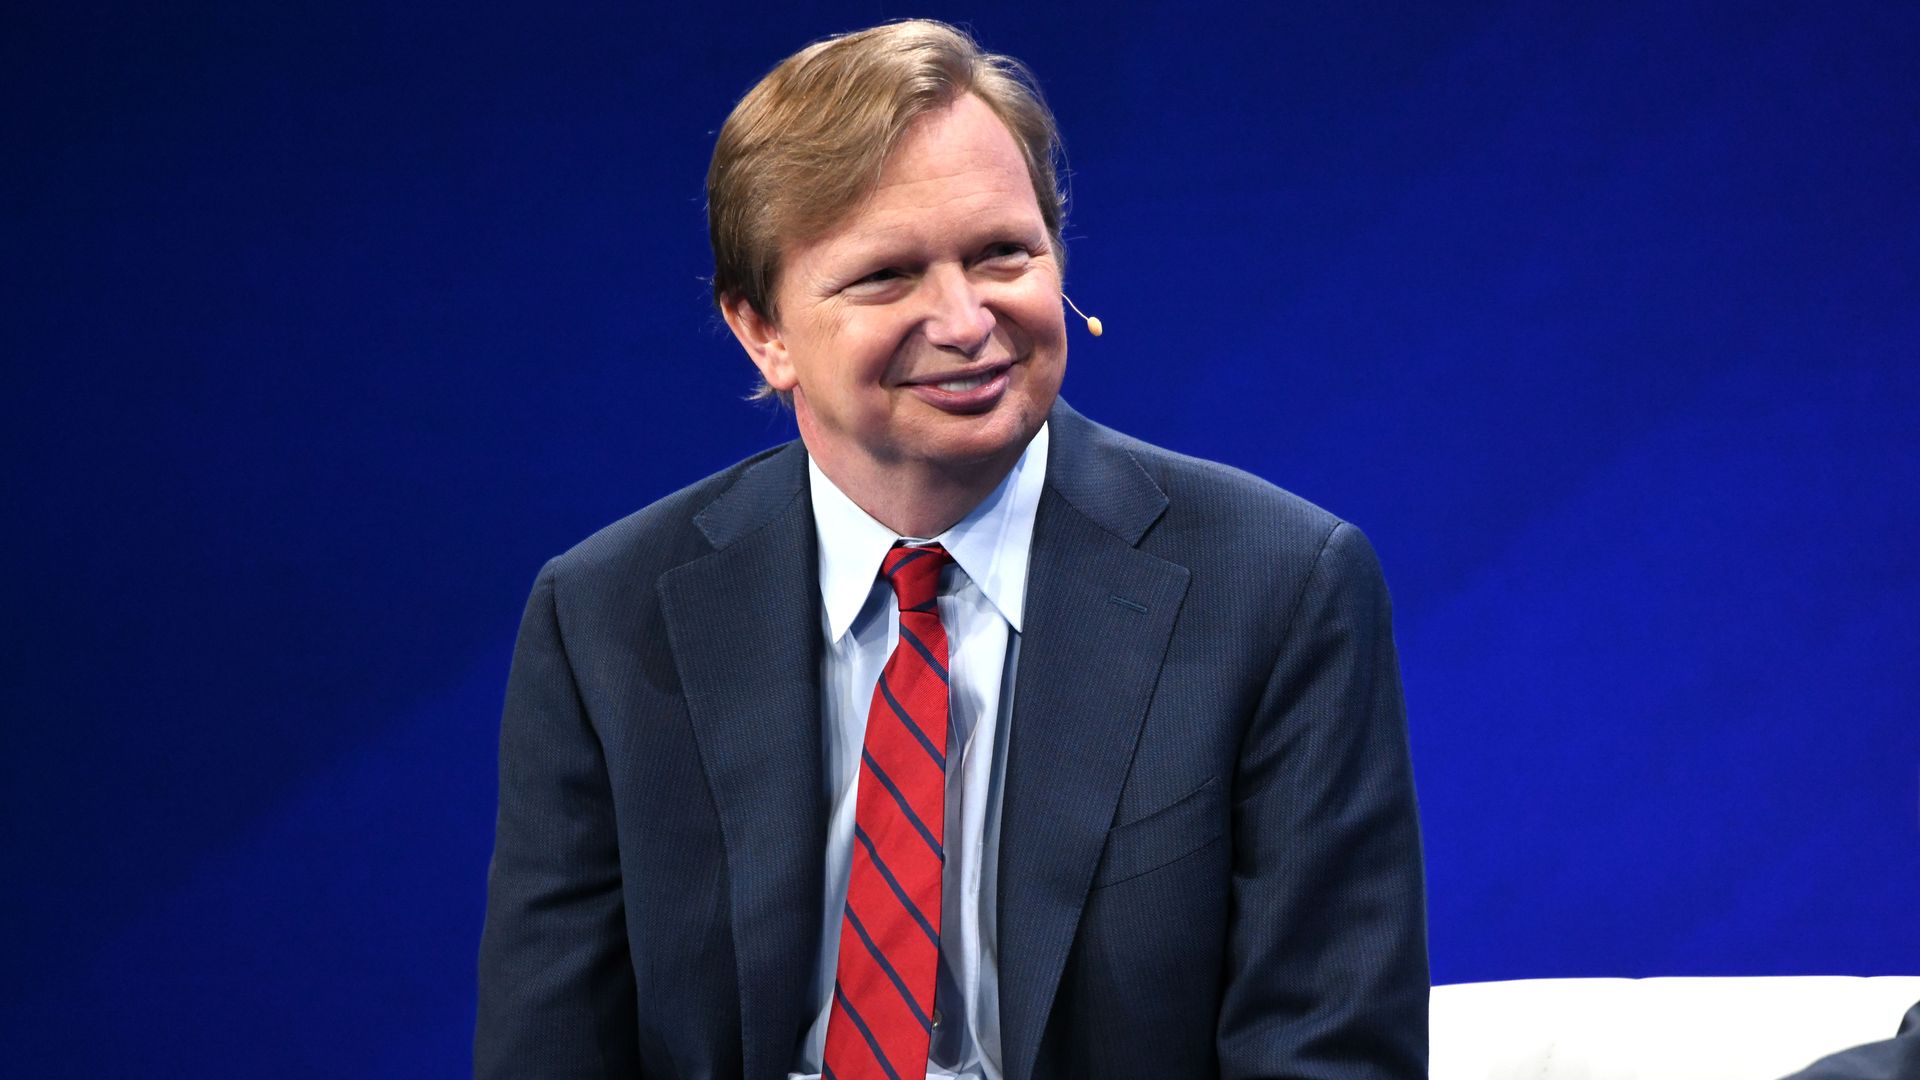 Former Obama aide Jim Messina is seen smiling during a speaking engagement.